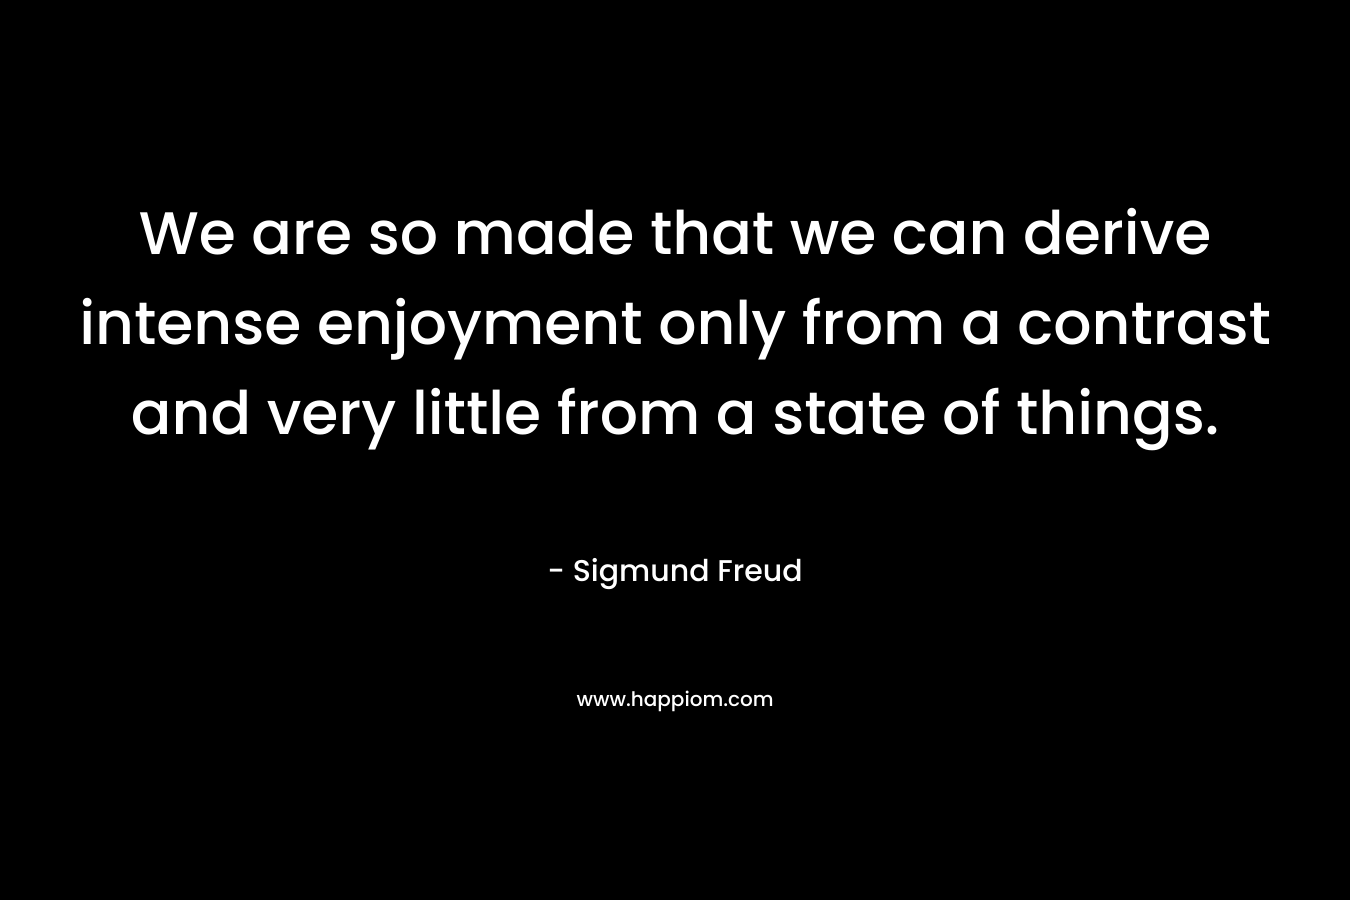 We are so made that we can derive intense enjoyment only from a contrast and very little from a state of things.